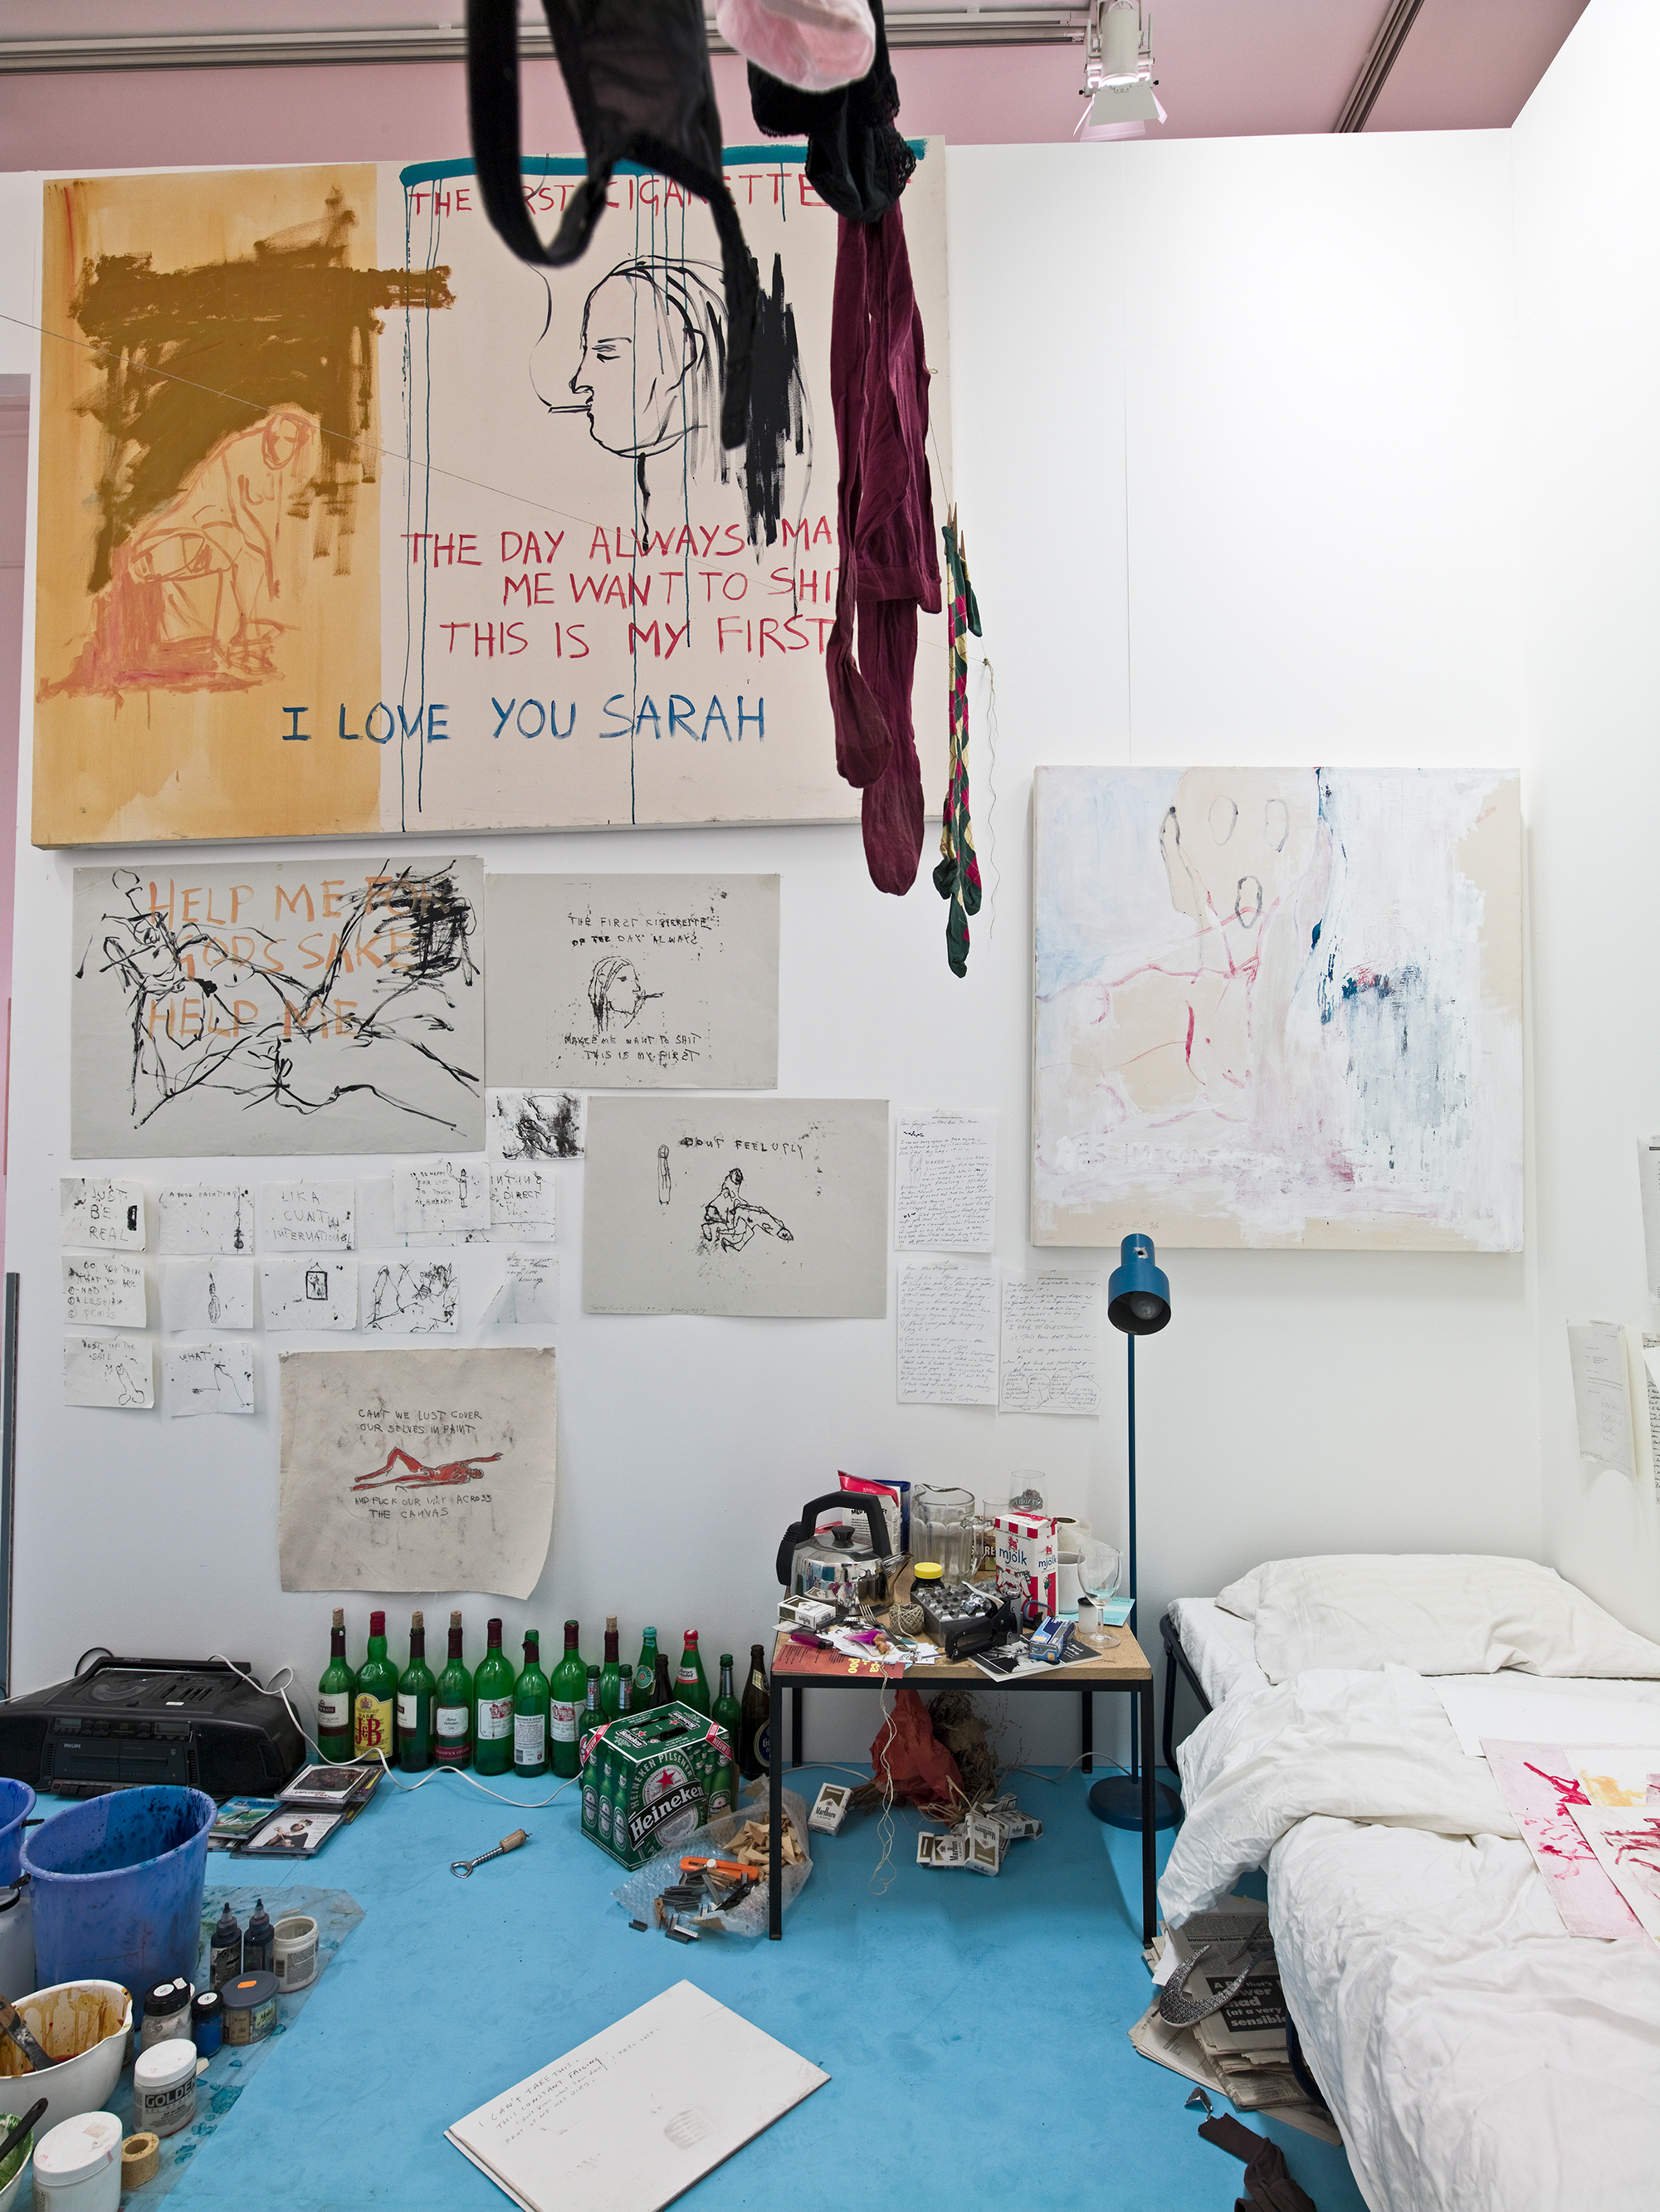 Tracey Emin: Exorcism of the Last Painting I Ever Made at Faurschou New York